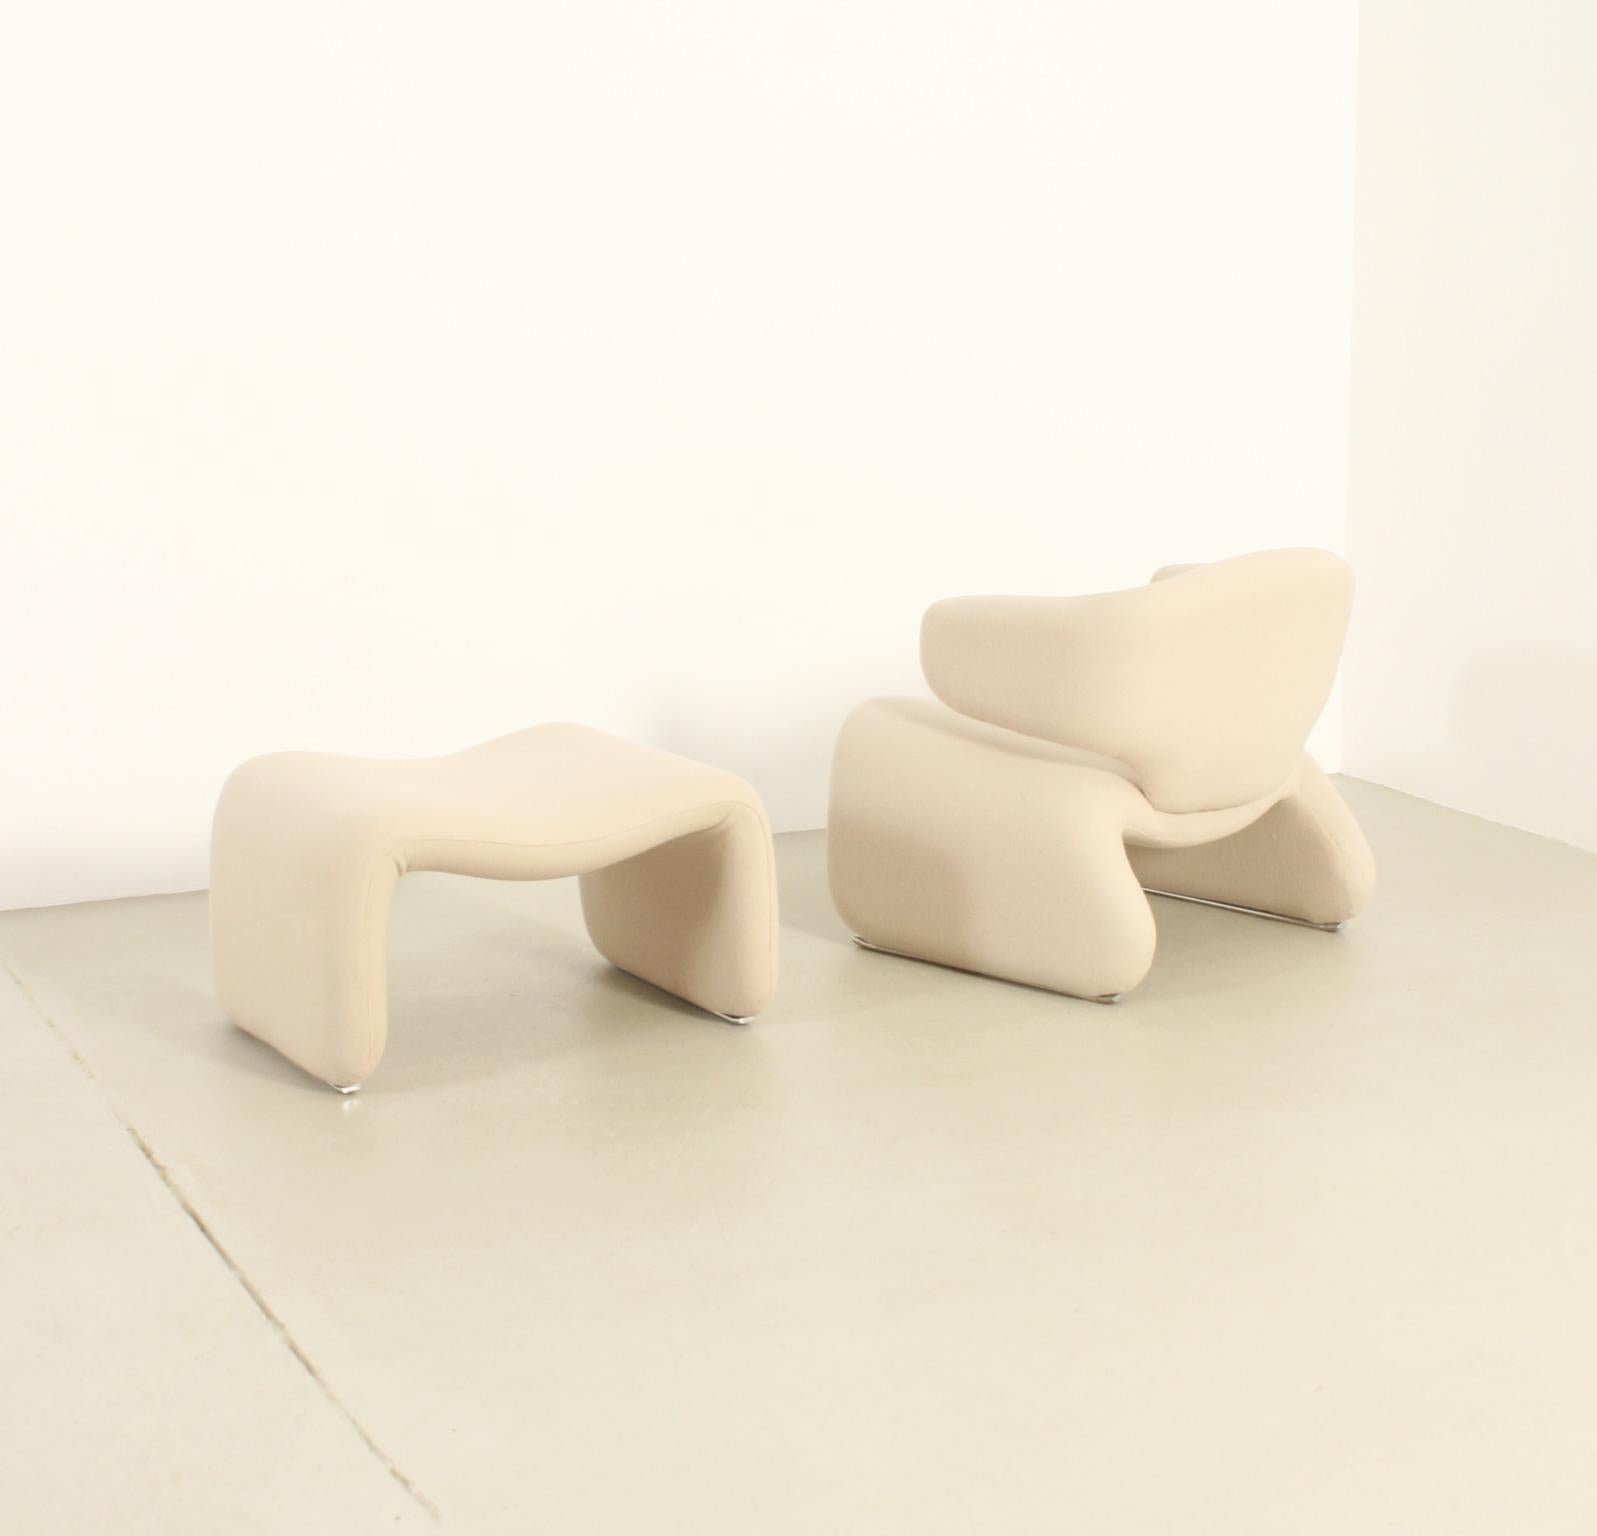 Dijnn Armchair and Ottoman by Olivier Mourgue for Airborne, France, 1965 For Sale 8